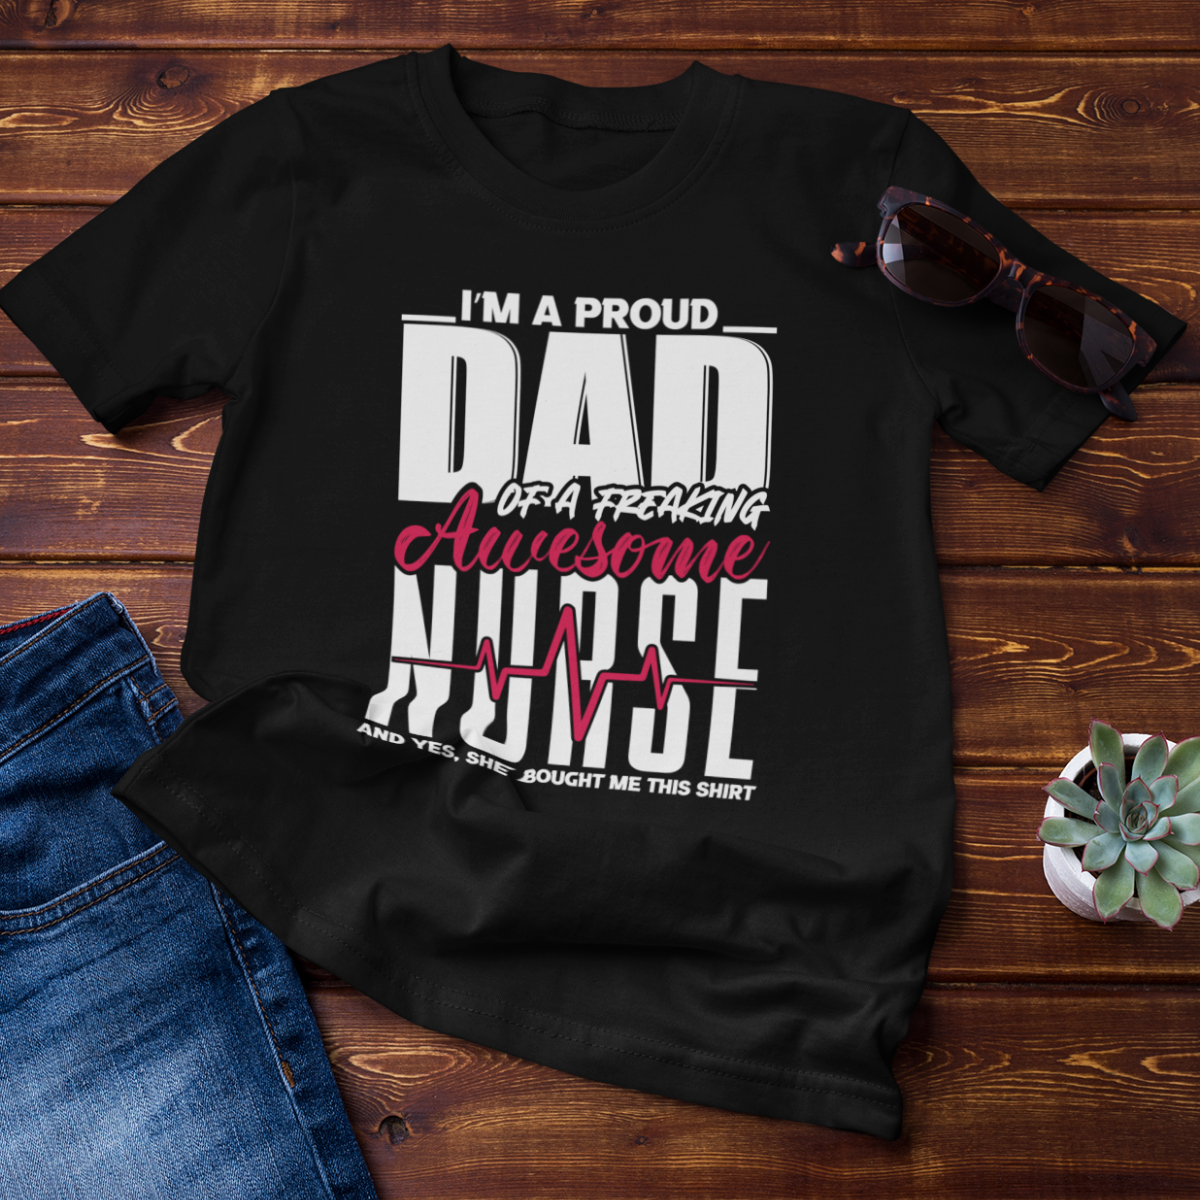 T-SHIRT - I'M A PROUD DAD OF A FREAKING AWESOME NURSE